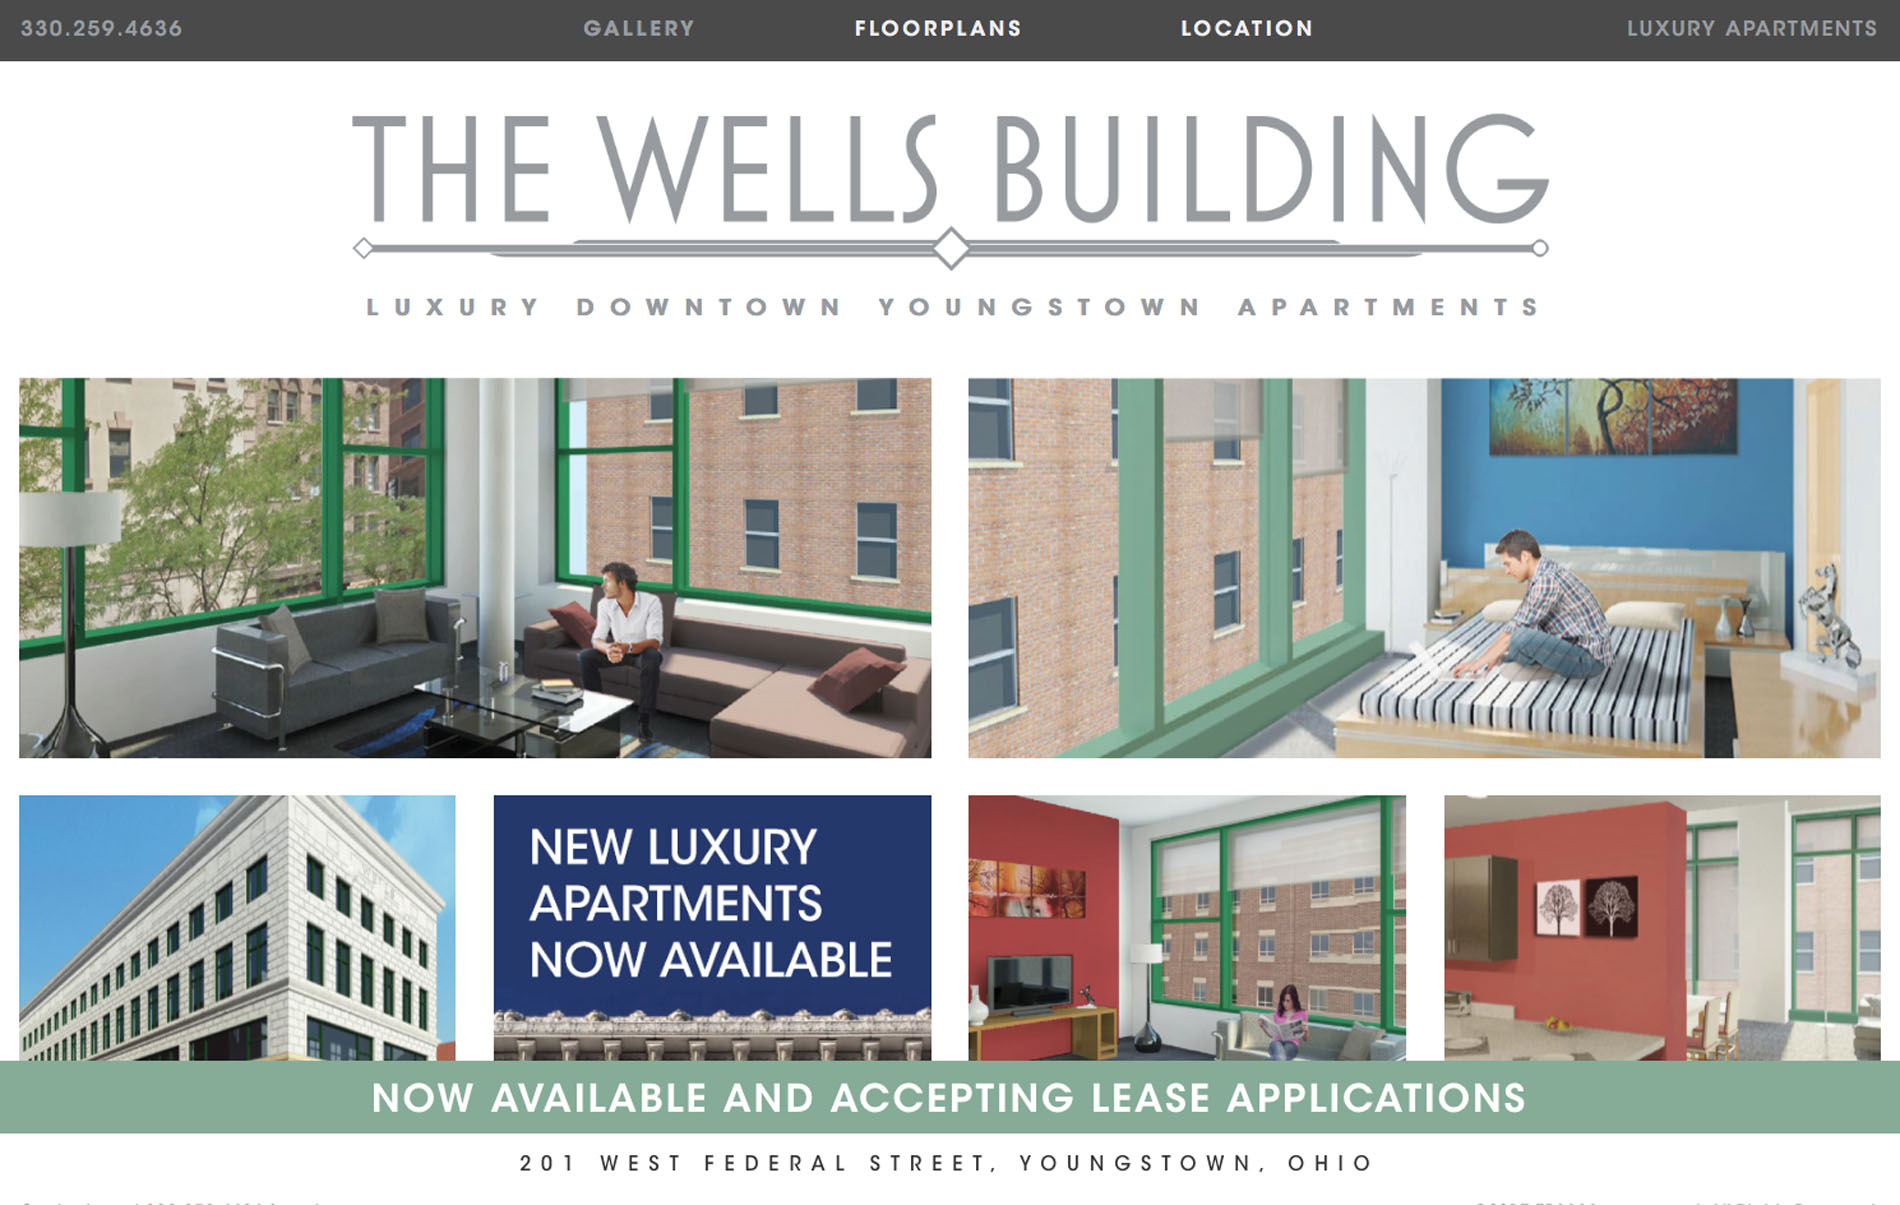 Wells Building Apartments Image